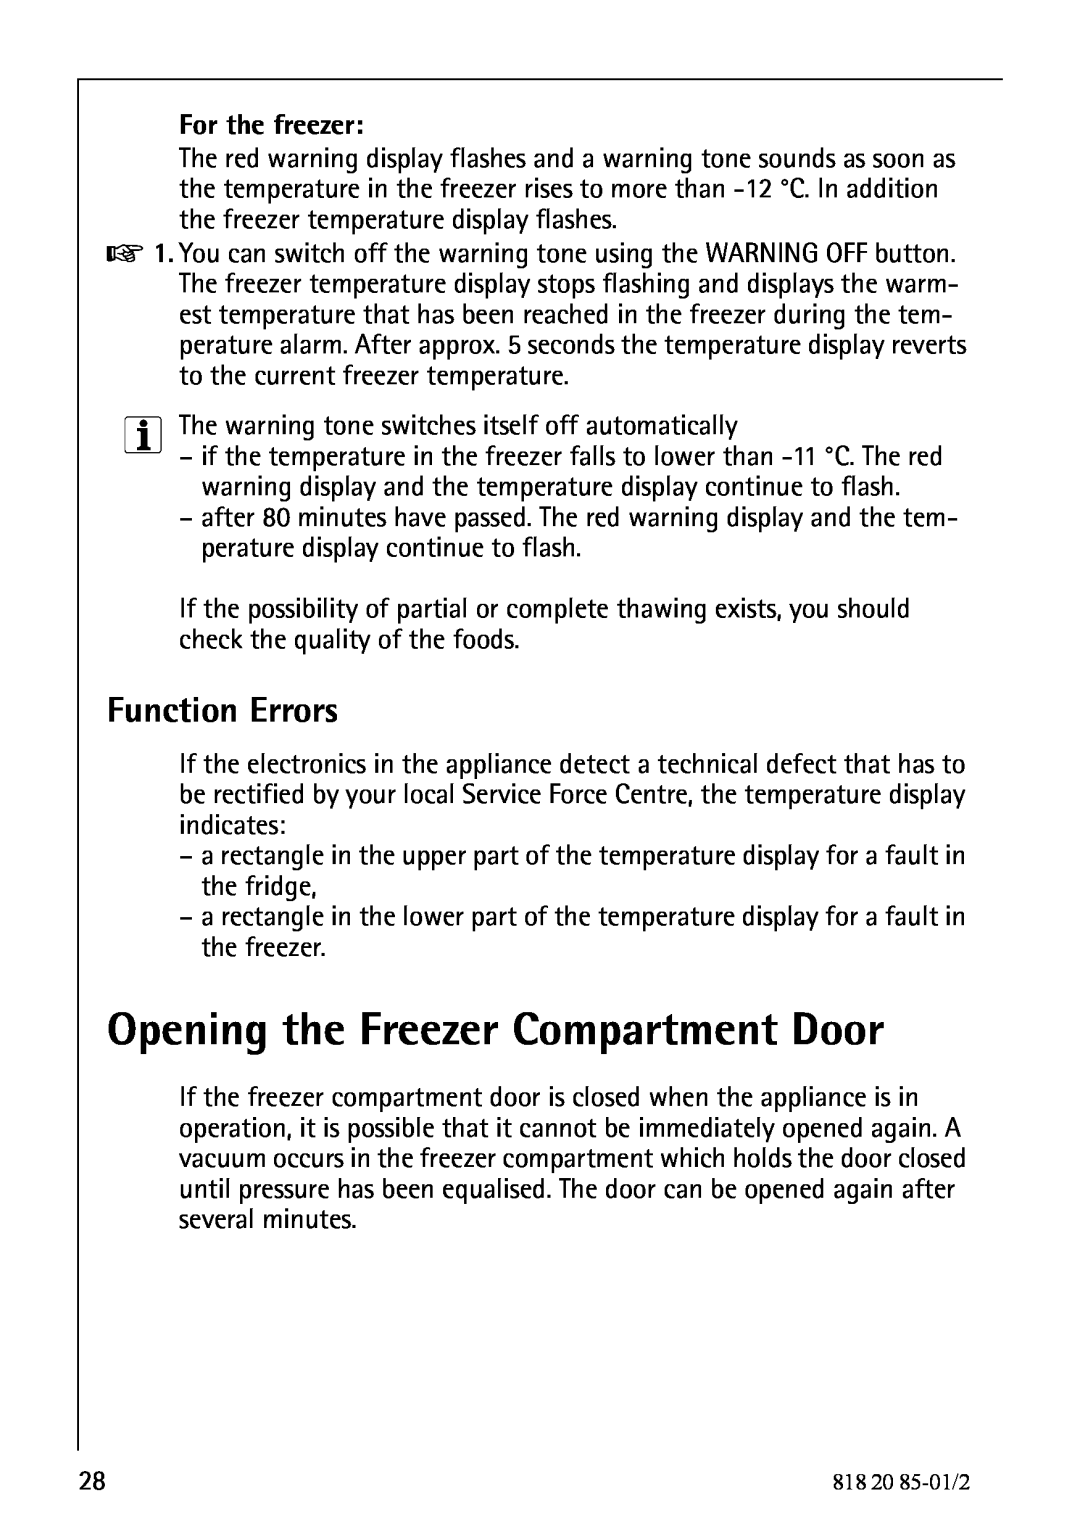 Electrolux 818 20 85 operating instructions Opening the Freezer Compartment Door, Function Errors, For the freezer 